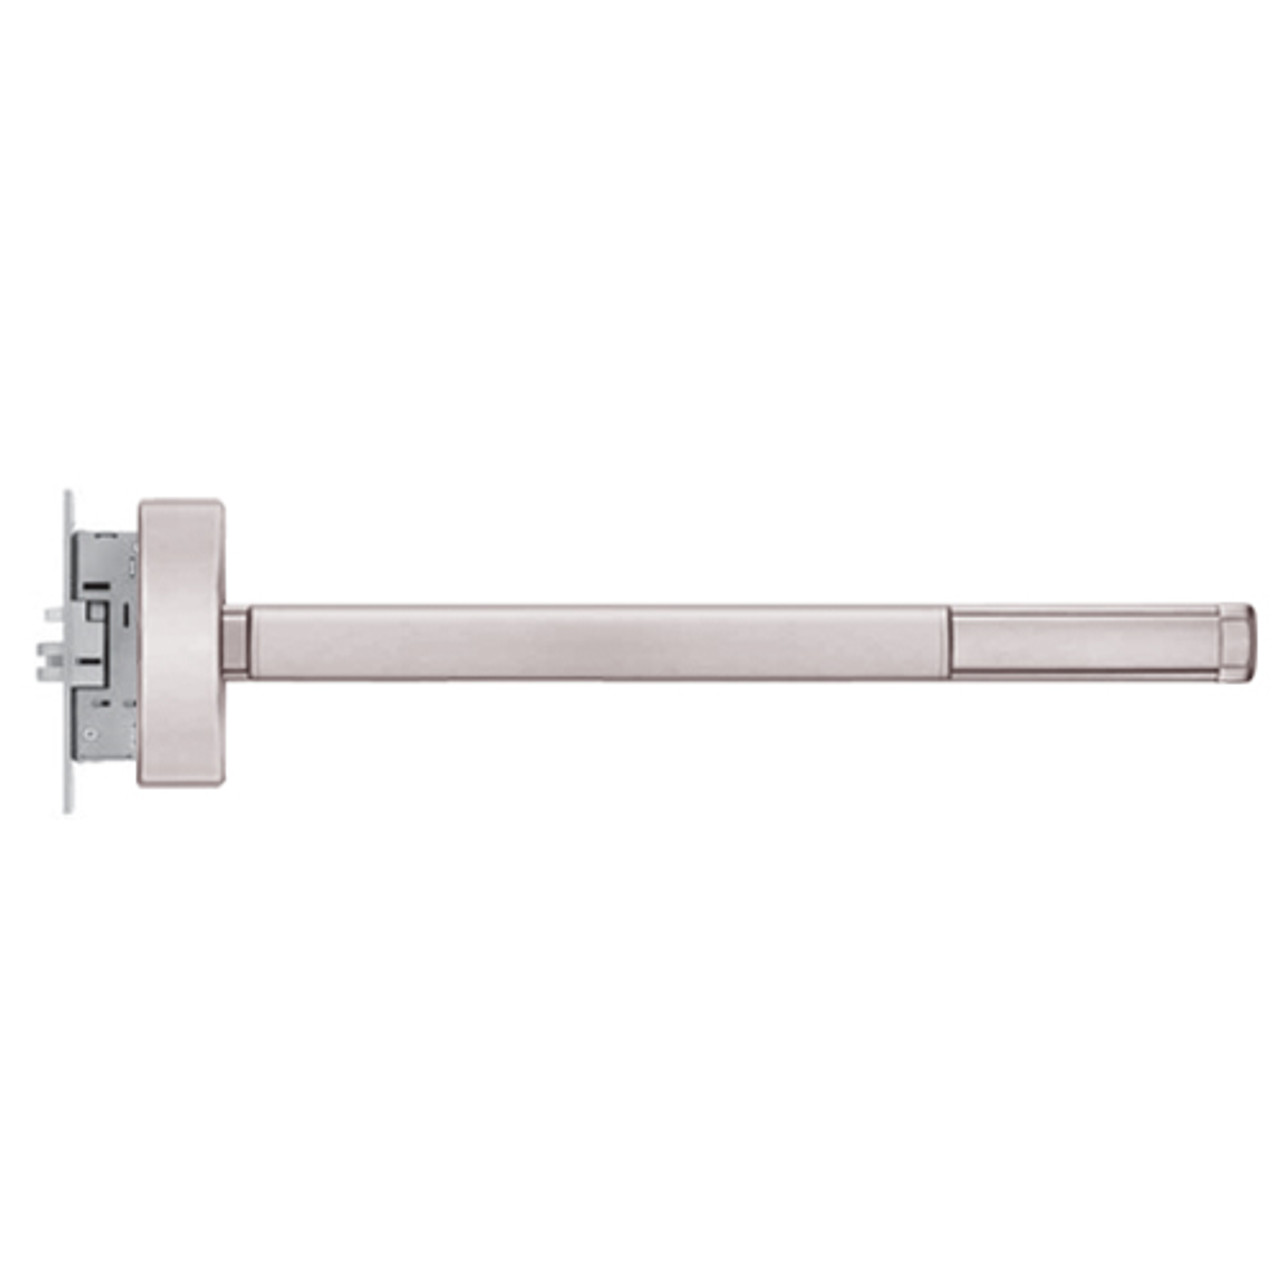 TSFL2314-LHR-628-48 PHI 2300 Series Fire Rated Apex Mortise Exit Device with Touchbar Monitoring Switch Prepped for Lever-Knob Always Active in Satin Aluminum Finish